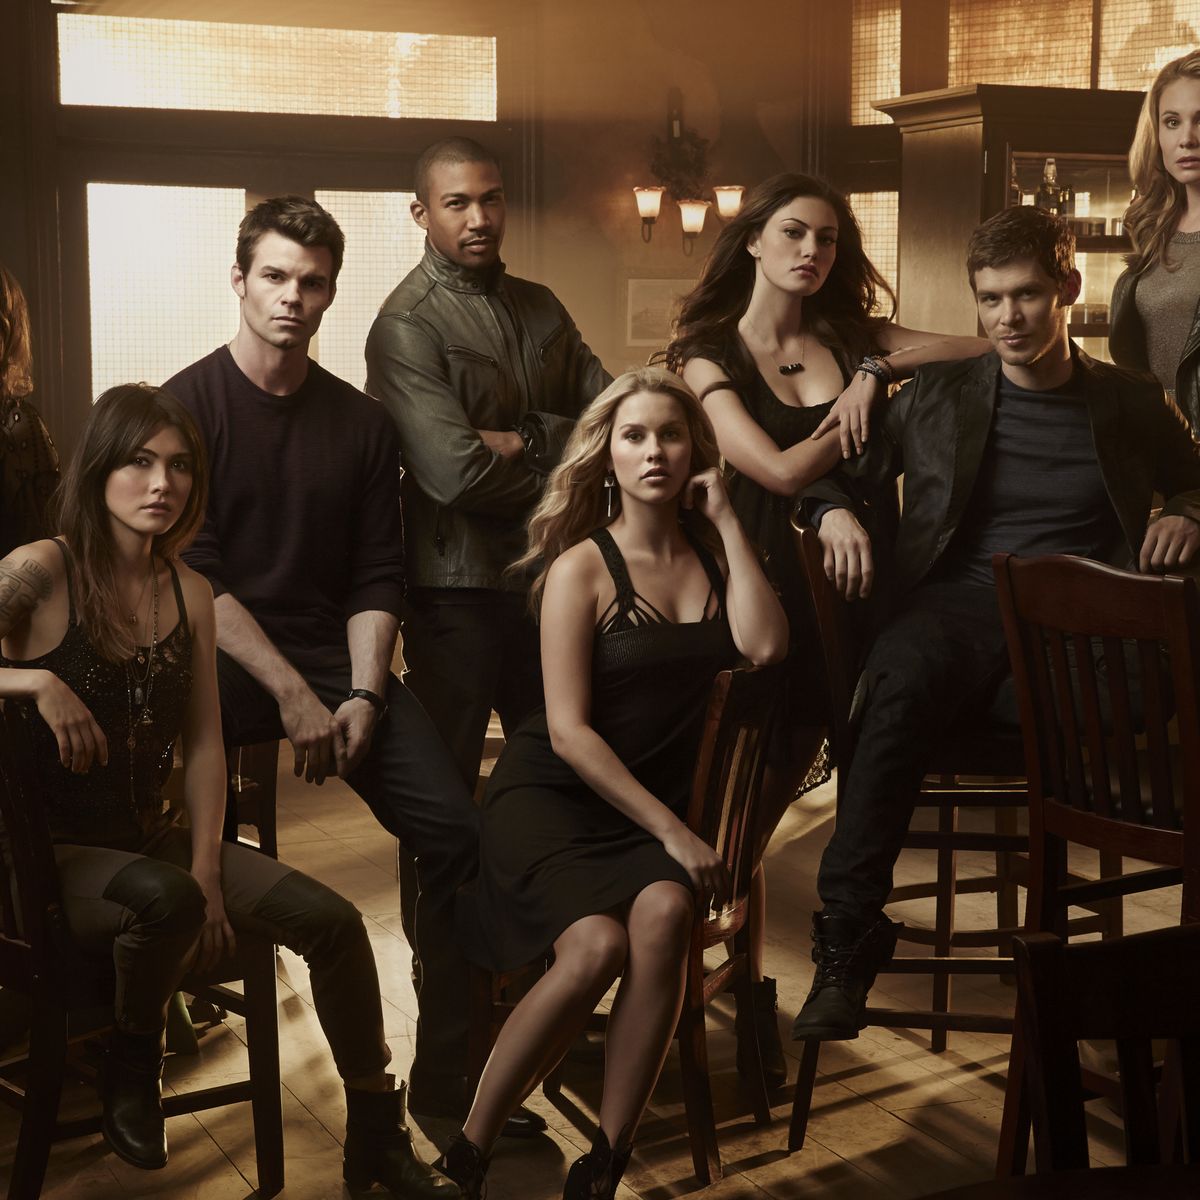 TVD/The Originals's Kol Mikaelson To Get A Webseries